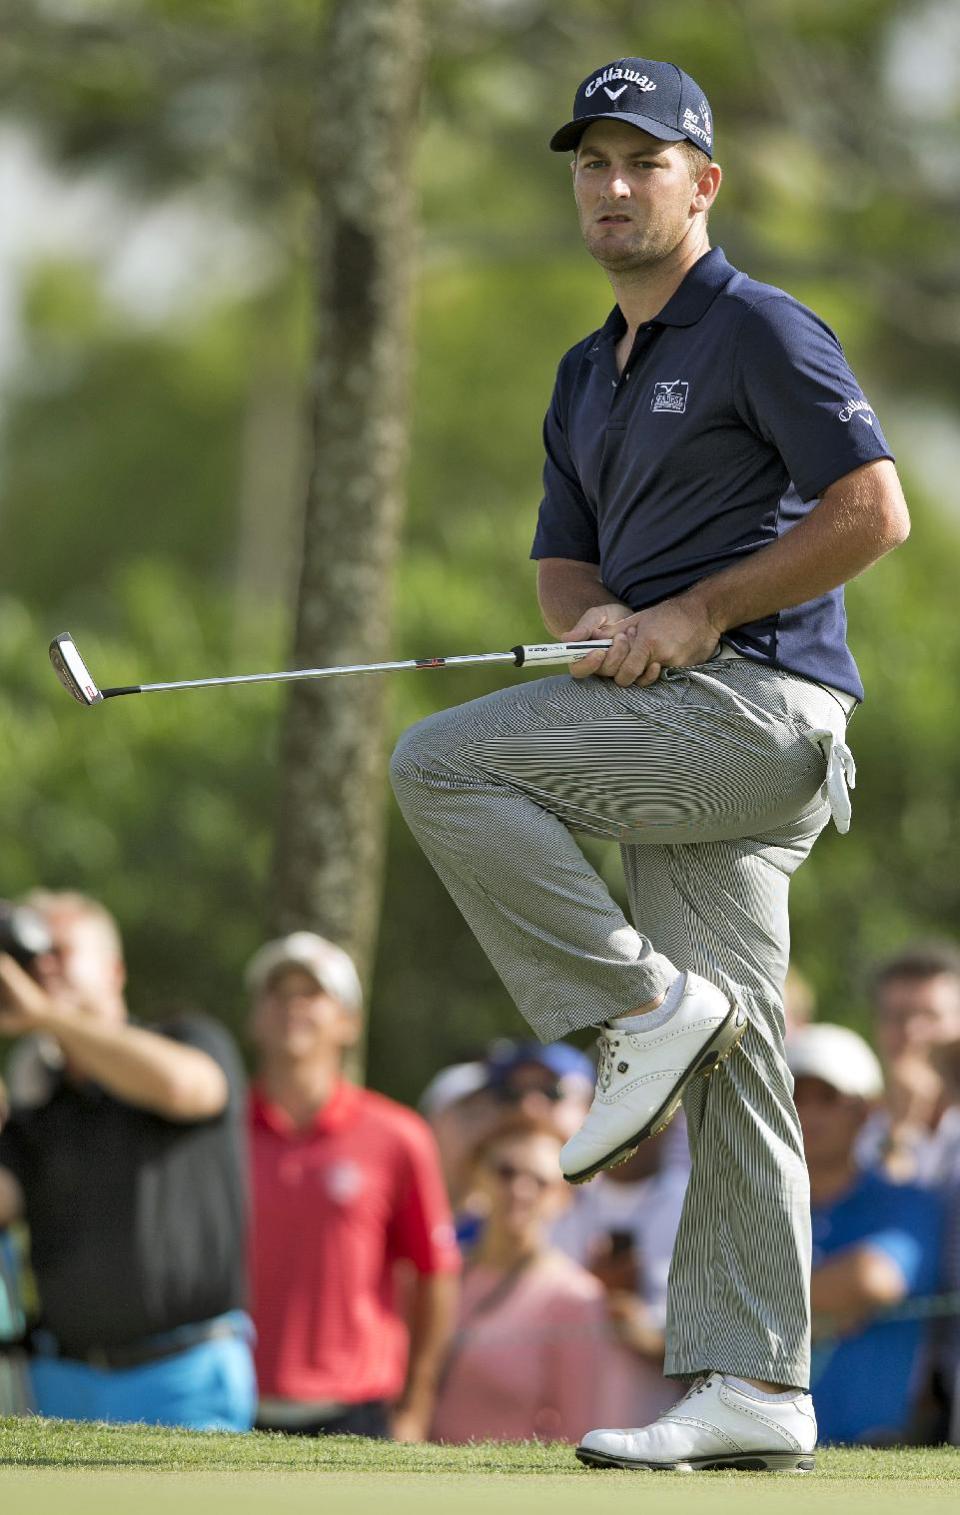 Matt Every kicks up his leg as he misses a putt on the 14th hole during the final round of the Arnold Palmer Invitational golf tournament at Bay Hill, Sunday, March 23, 2014, in Orlando, Fla. Every went onto win the tournament. (AP Photo/Willie J. Allen Jr.)